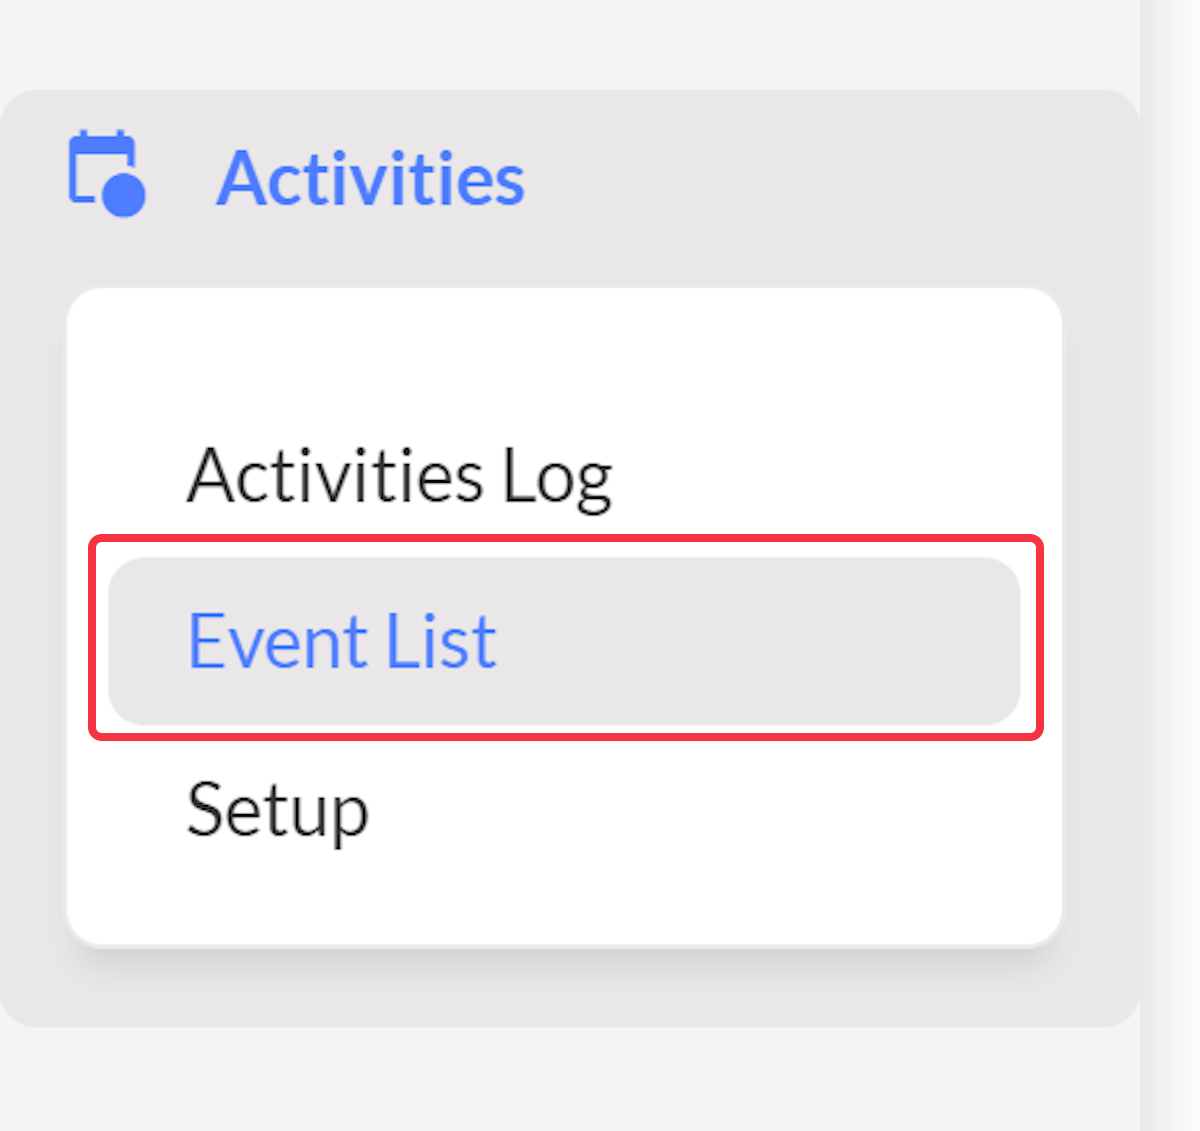 Within Activities select Event List.